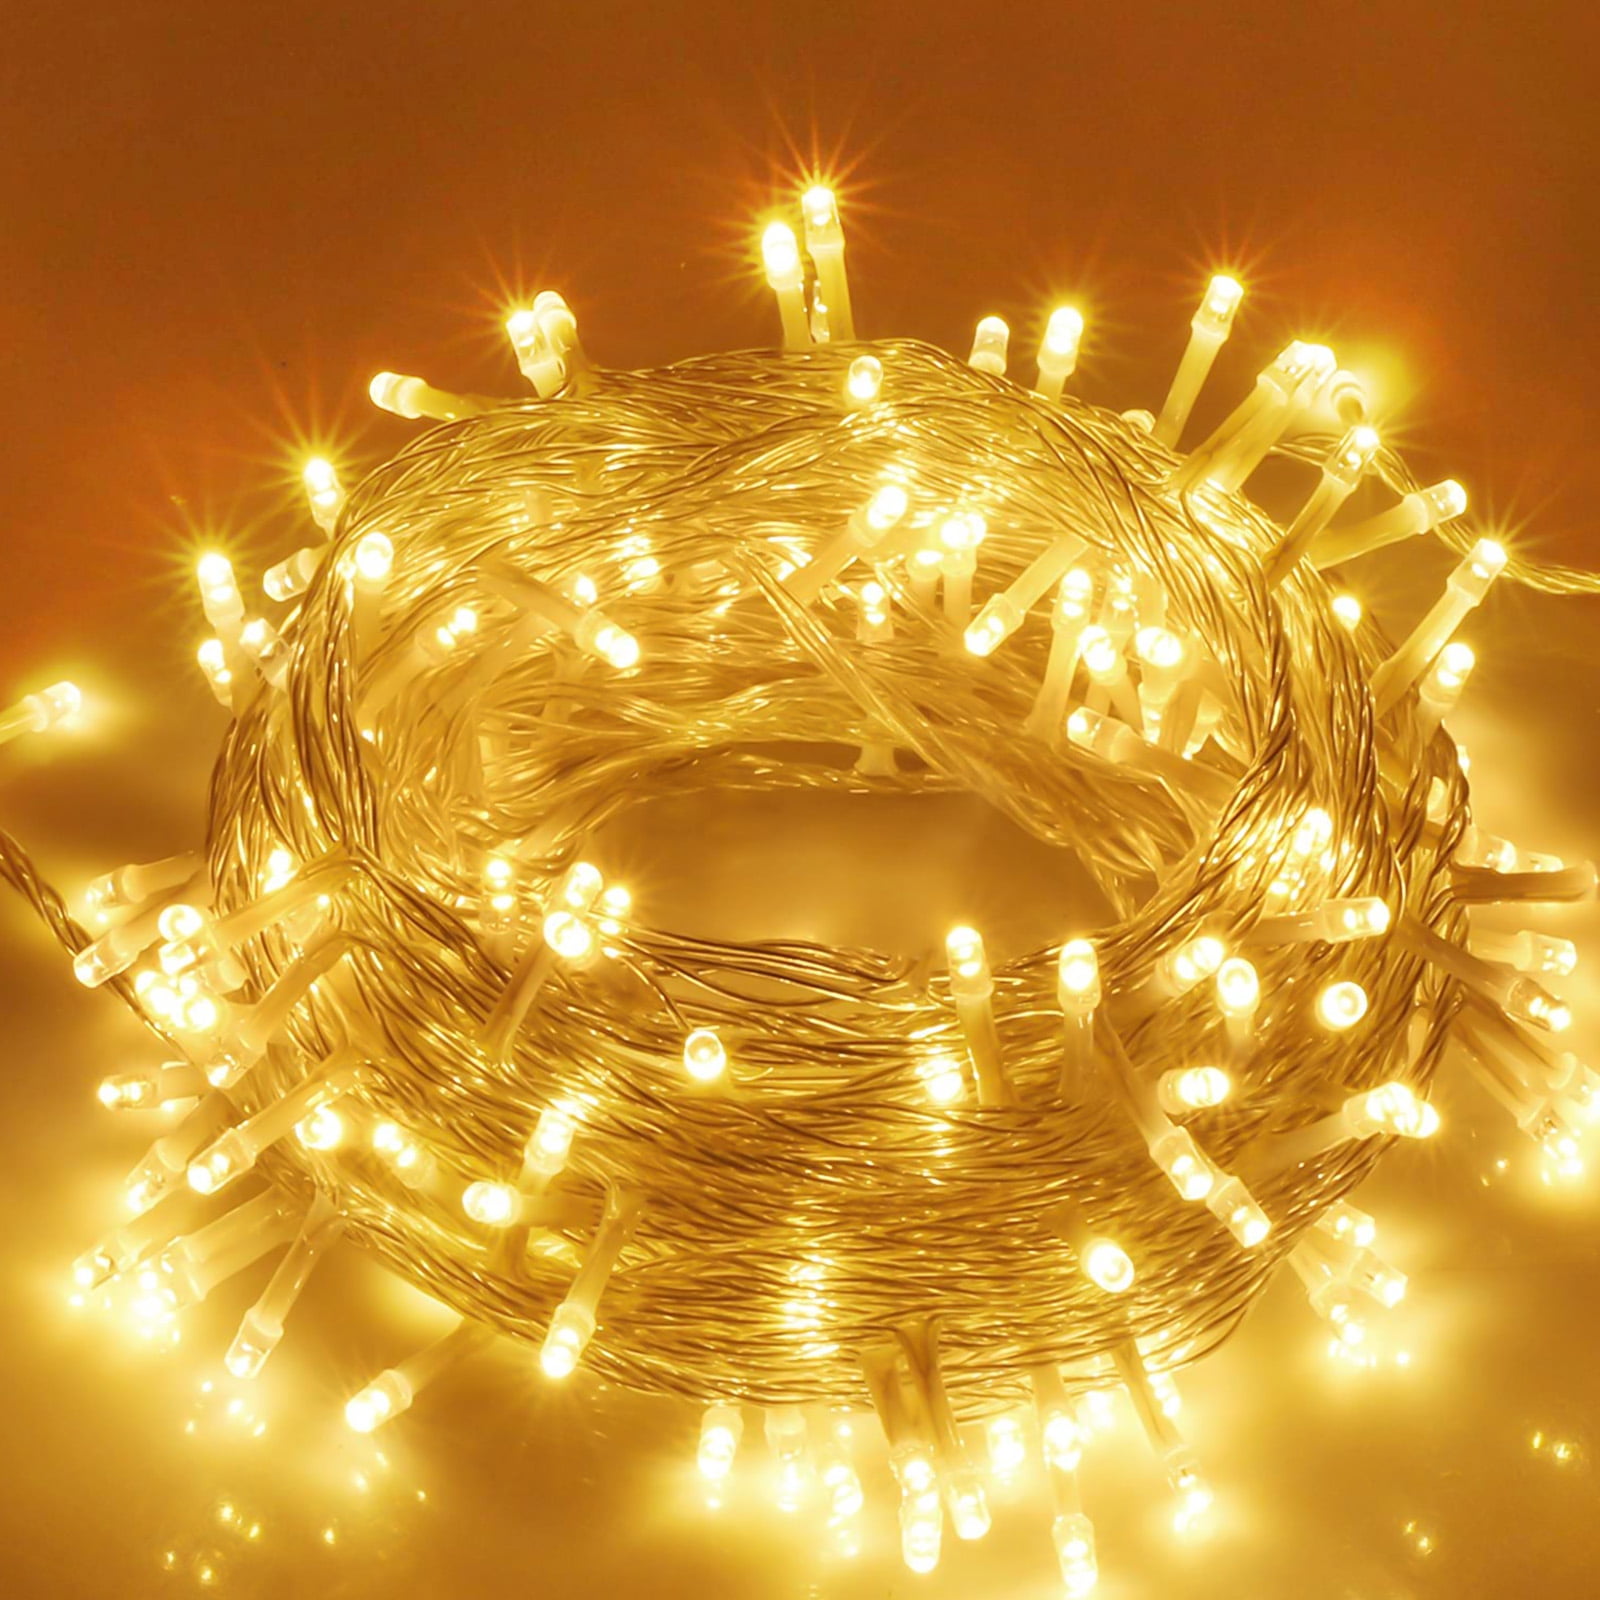 20 LED 2M Copper Wire Twinkle Light Warm/Cool White String Fairy Lights_TS 